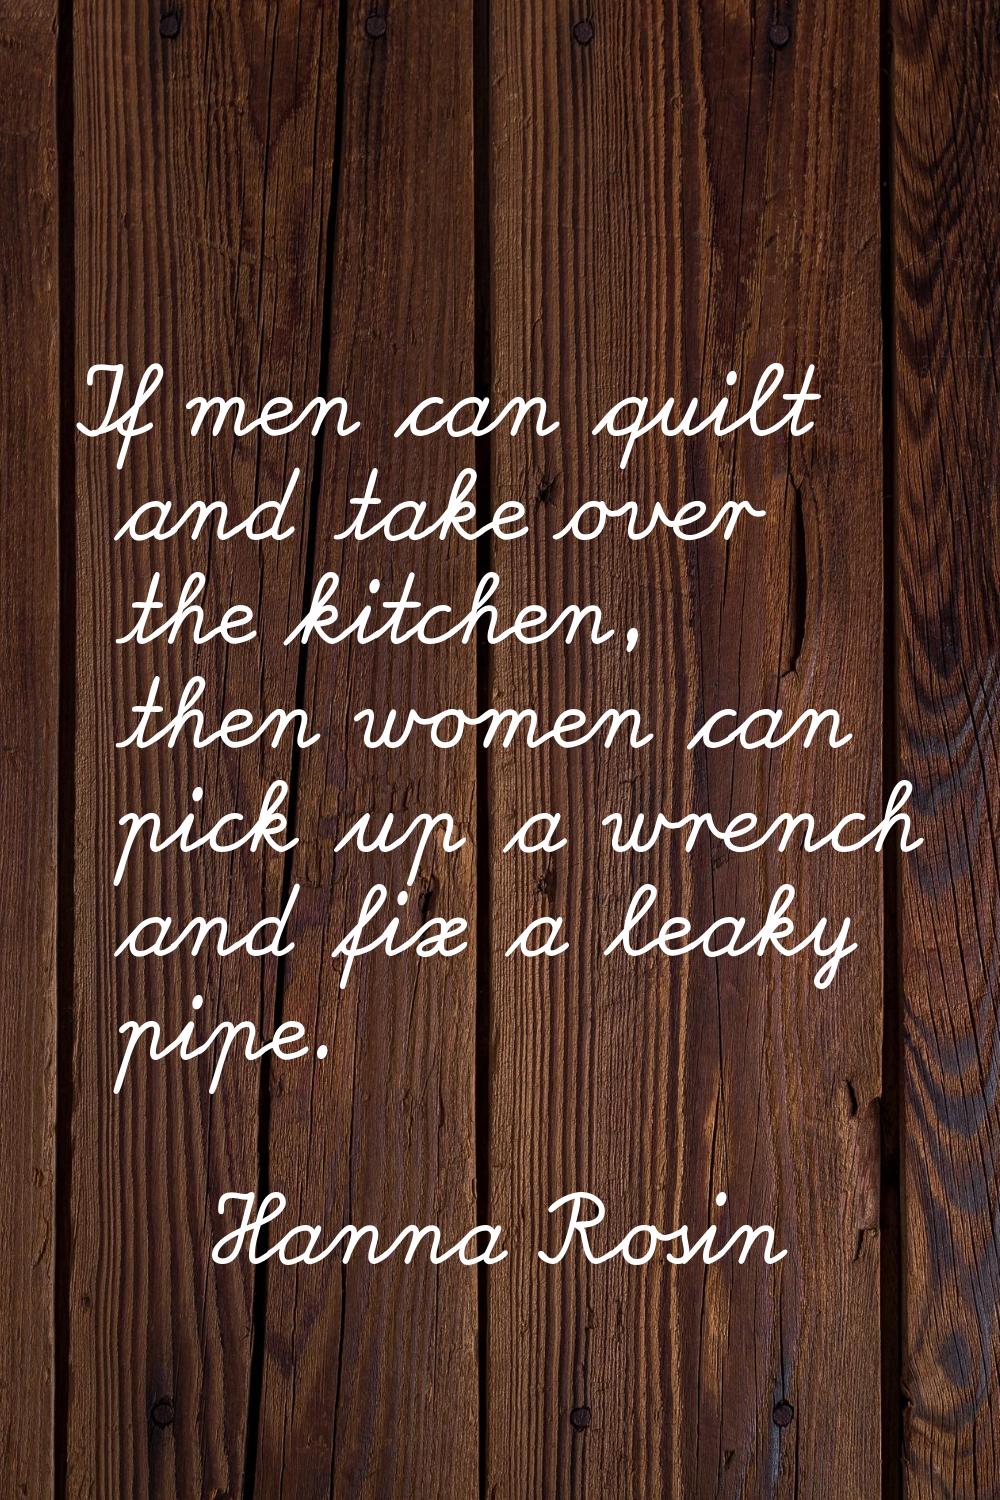 If men can quilt and take over the kitchen, then women can pick up a wrench and fix a leaky pipe.